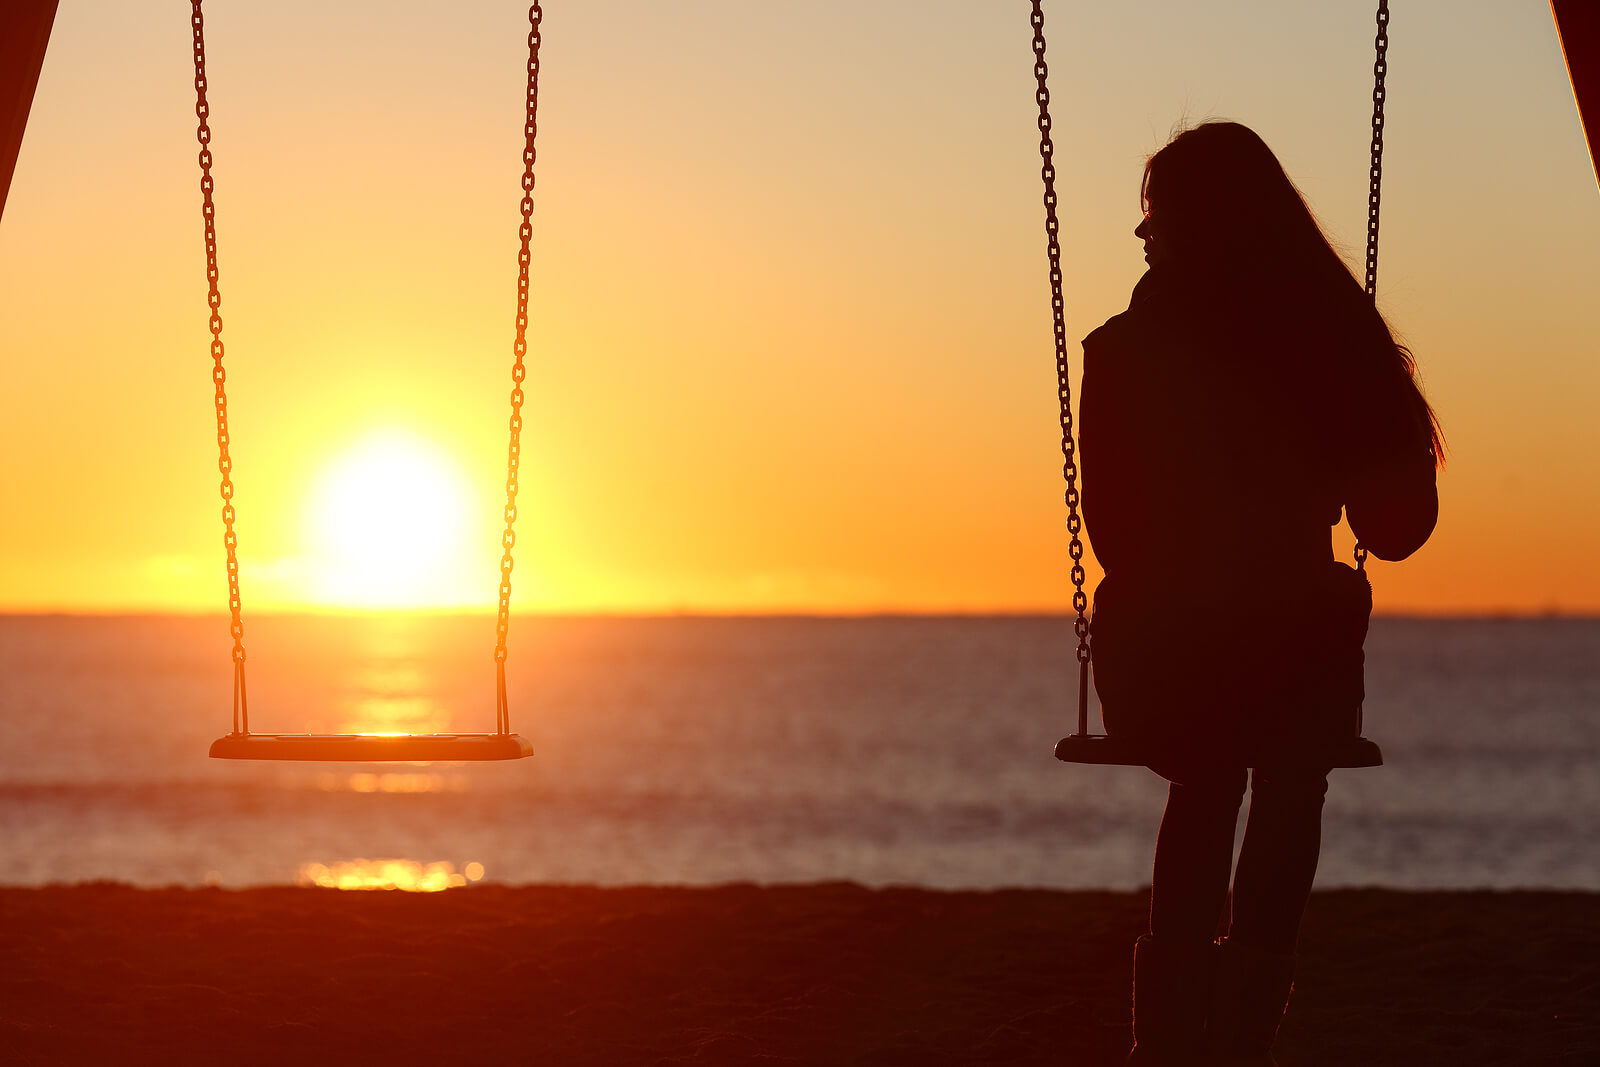 A woman sits on a swing set on the beach with the sun setting alone. Looking to improve your relationships? Individual therapy for relationship issues in Austin, TX can help you understand your relationships better. Speak with a relationship issues therapist in Texas today!